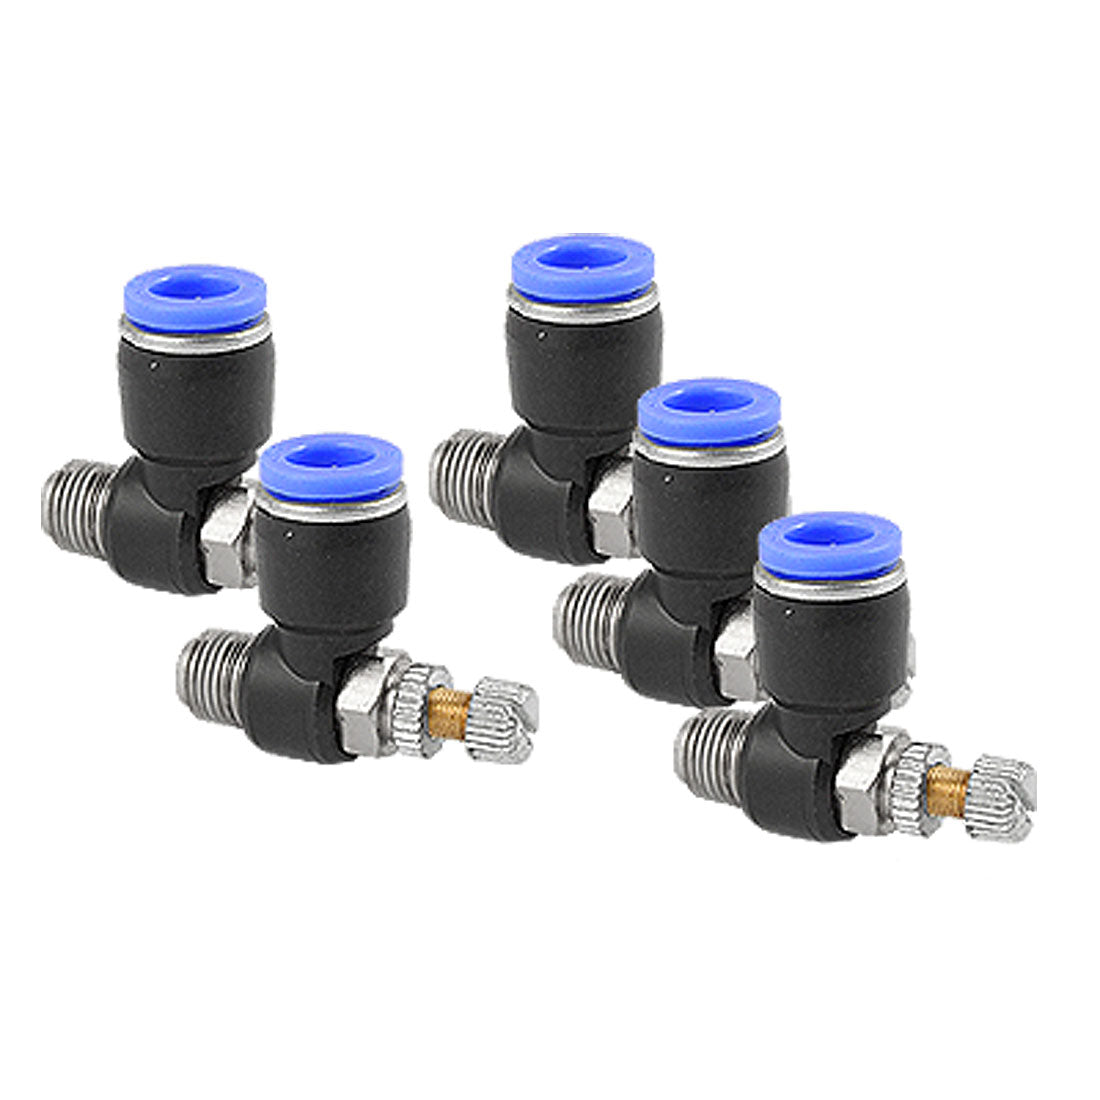 uxcell Uxcell 5 Pcs 9mm Threaded Push In Pneumatic Part Speed Controller Valve